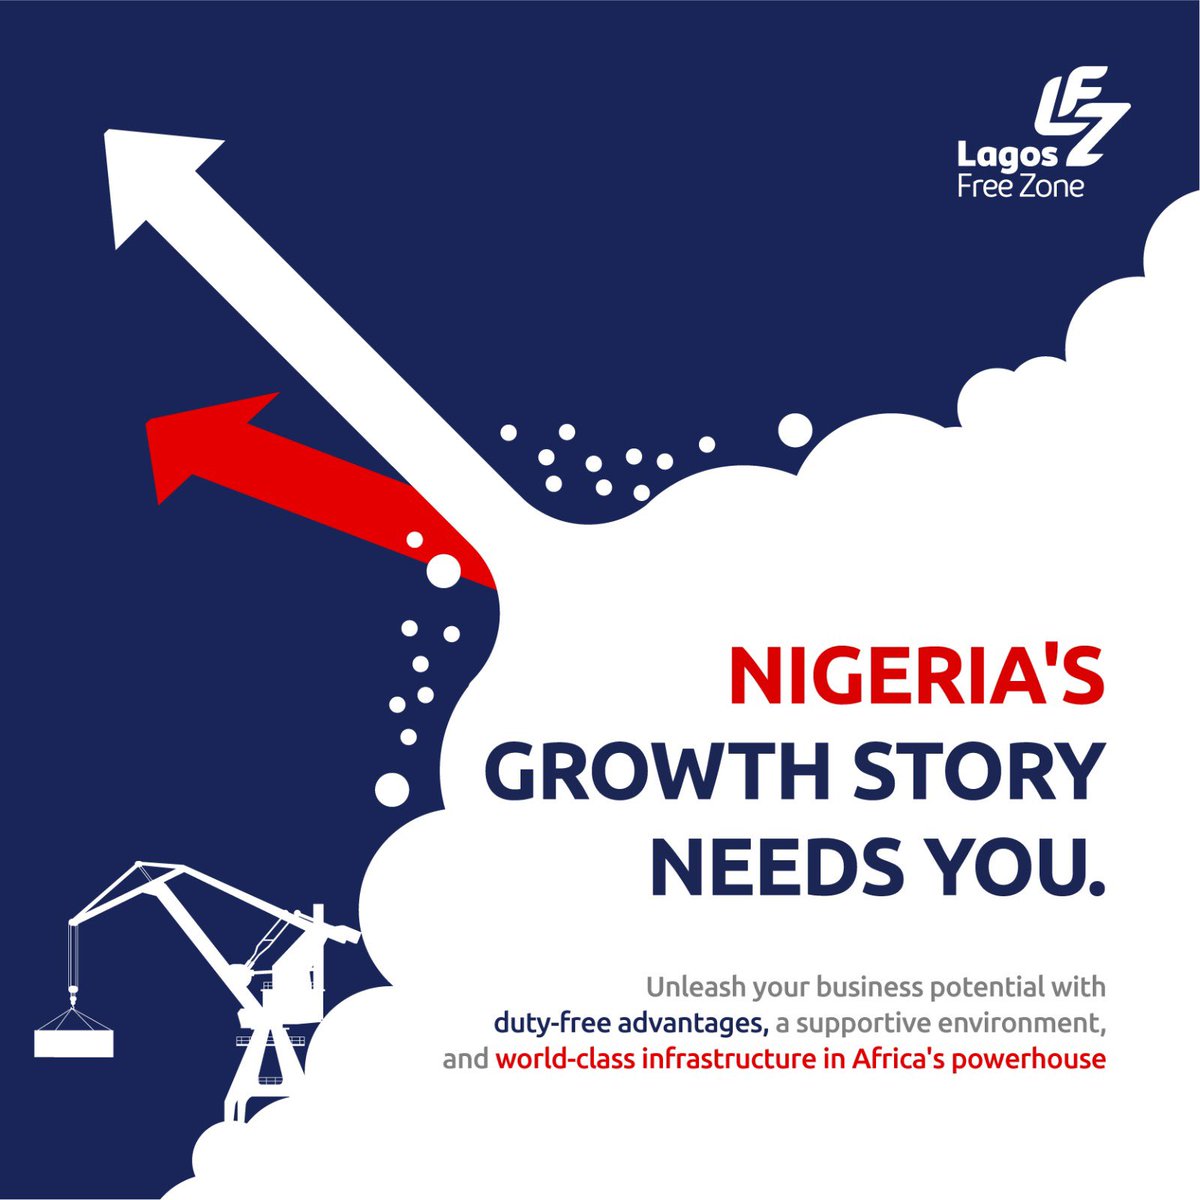 Multinational brands like Kellogg's, Colgate and BASF are thriving at Lagos Free Zone, enjoying: - Tax-free advantages to boost profits - World-class infrastructure for smooth operations - A customer-centric supportive environment Contact us today to learn how you too can